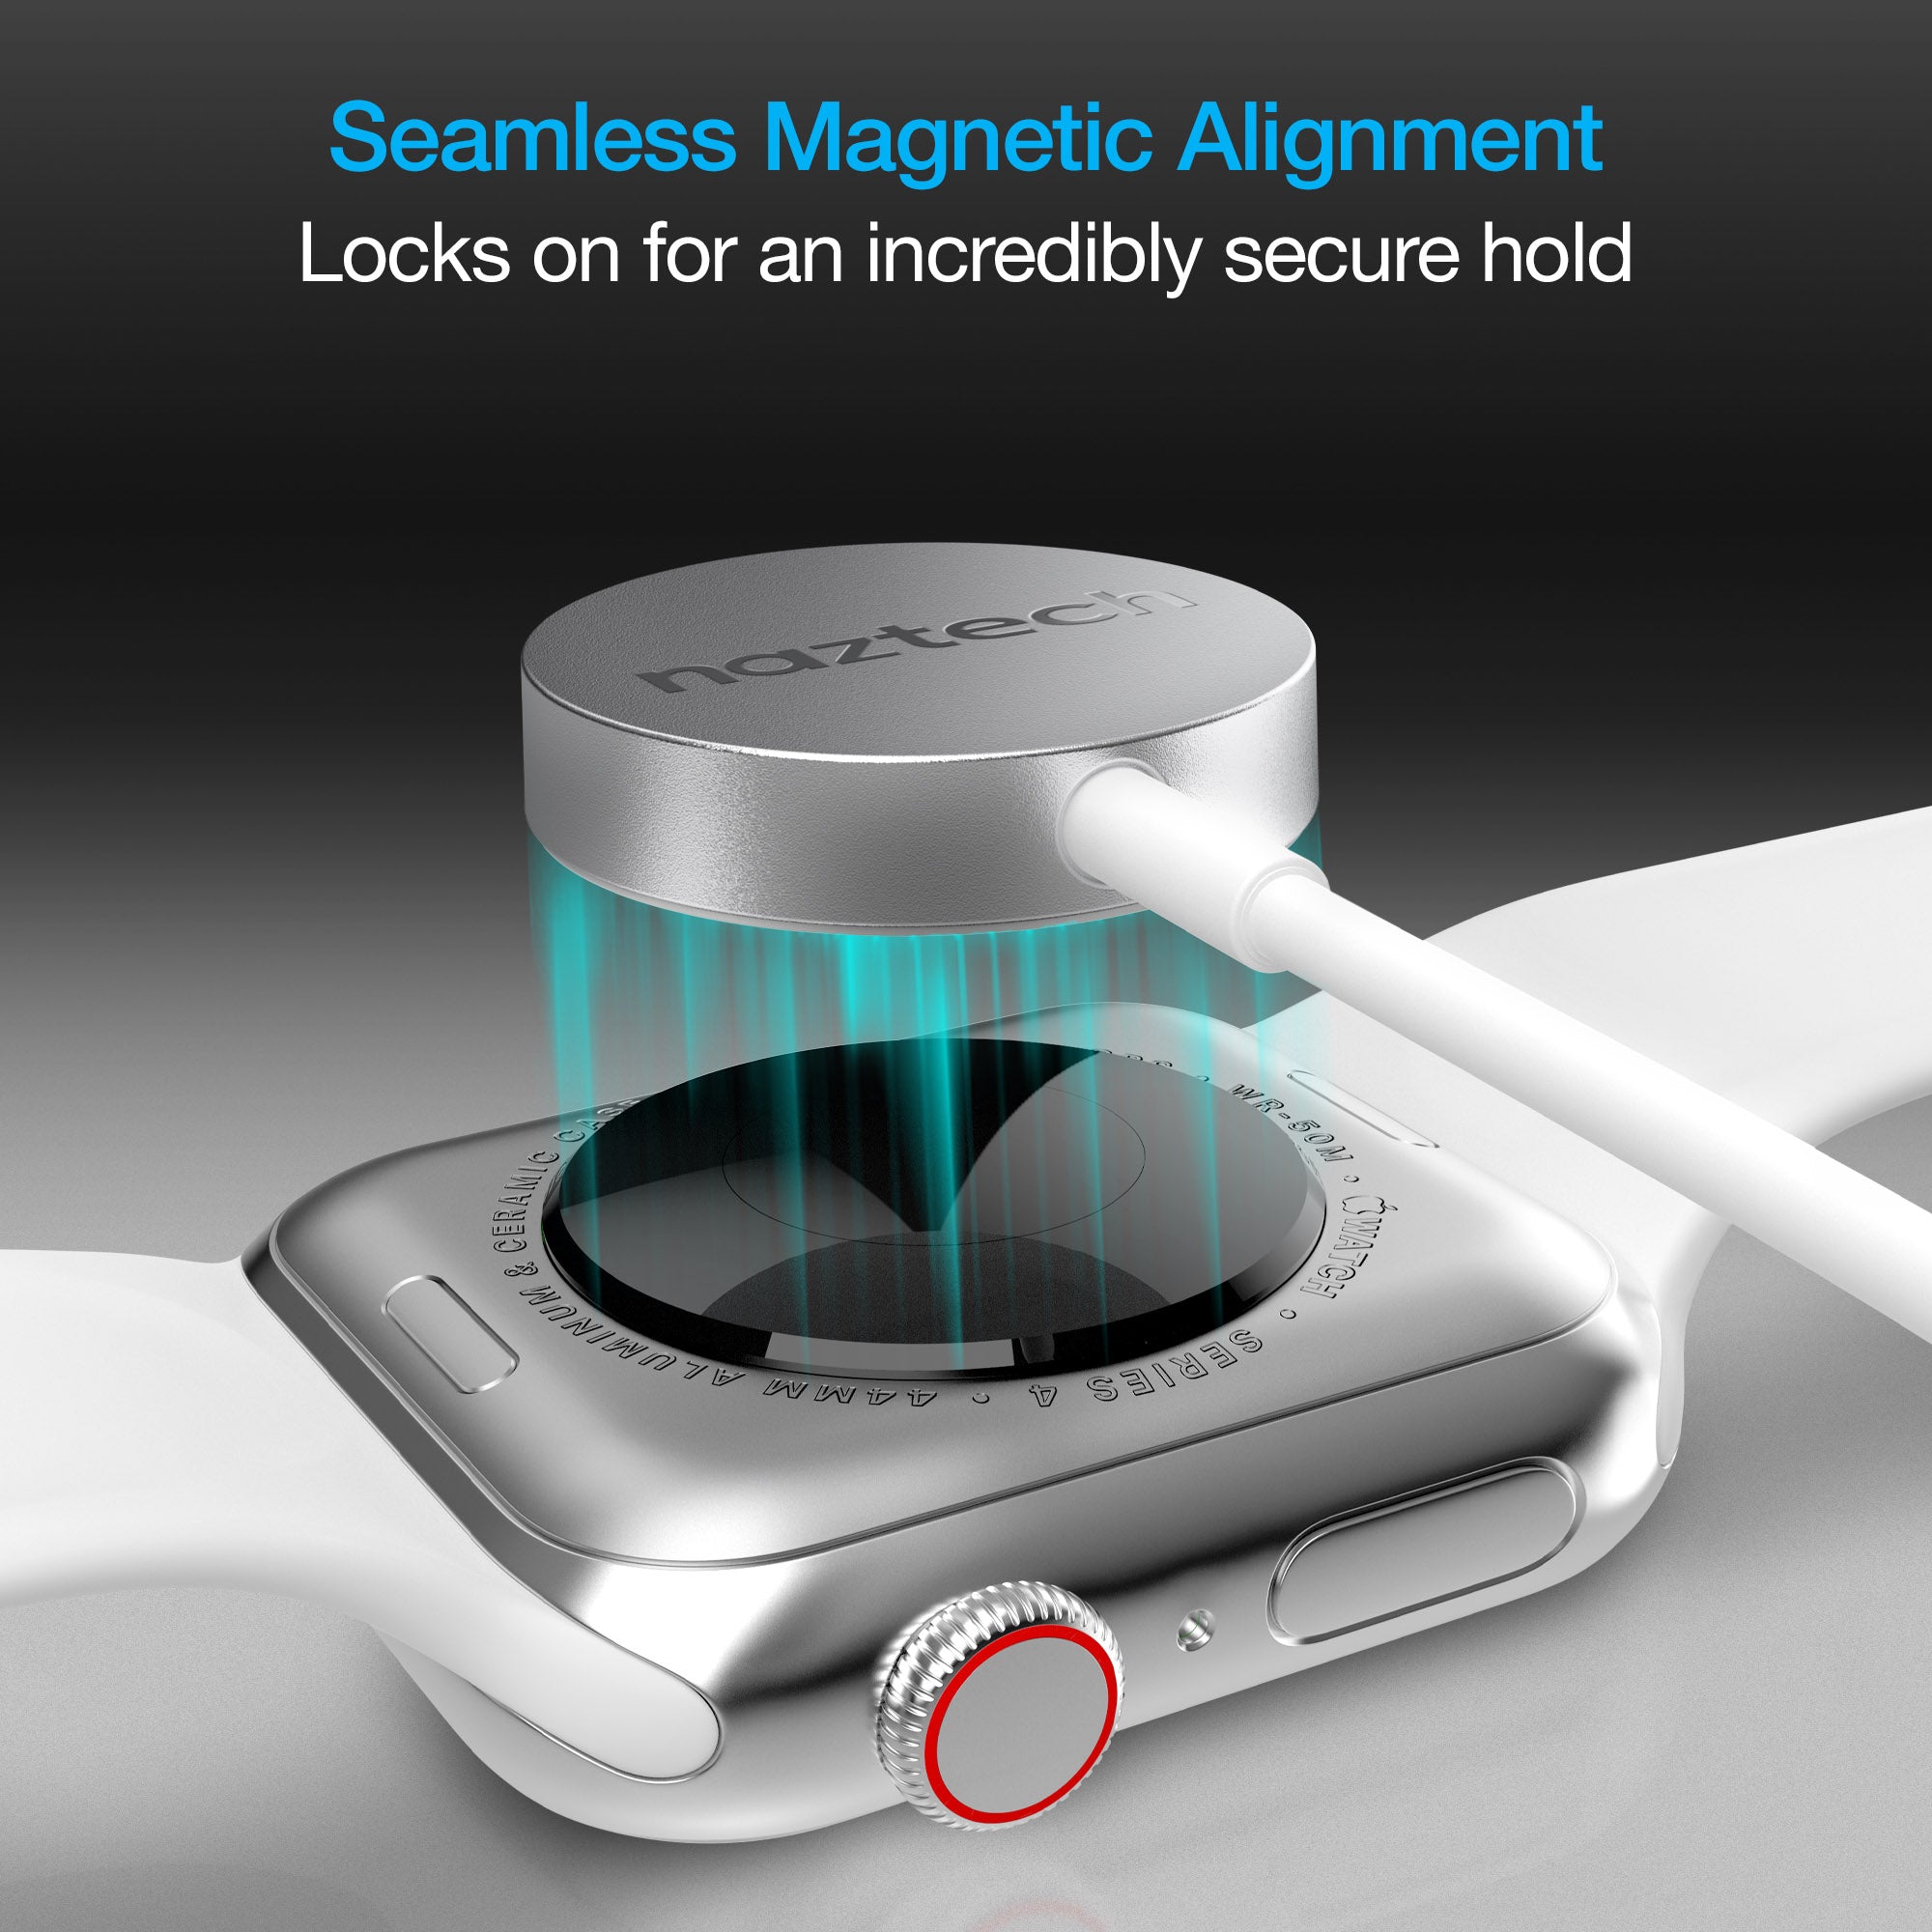 Magnetic Charger for Apple Watch | White